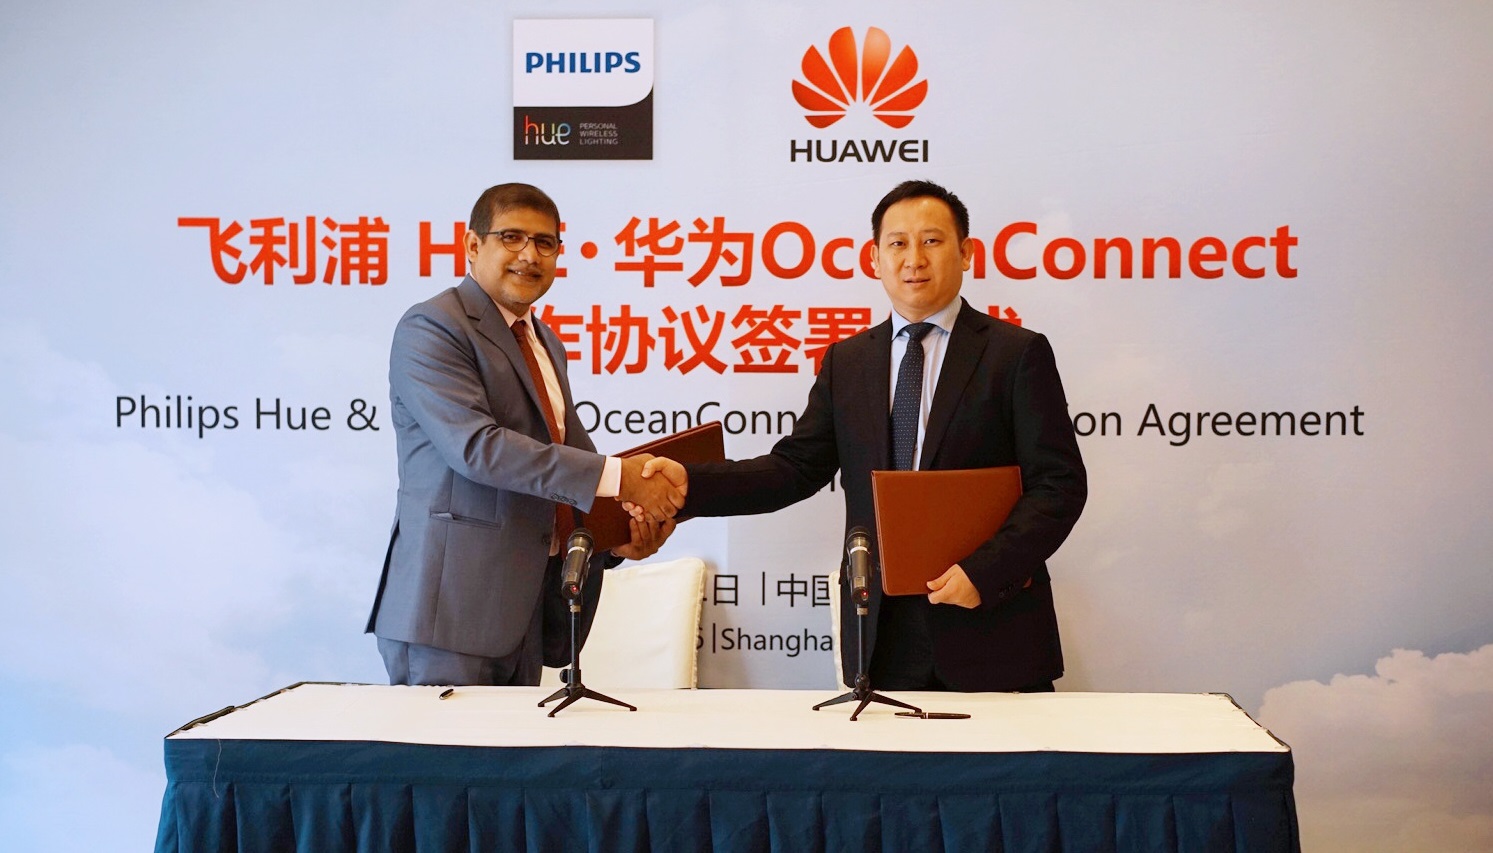 Philips_Hue__Huawei_OceanConnect_Cooperation_Agreement_Signing0D0A_Ceremony